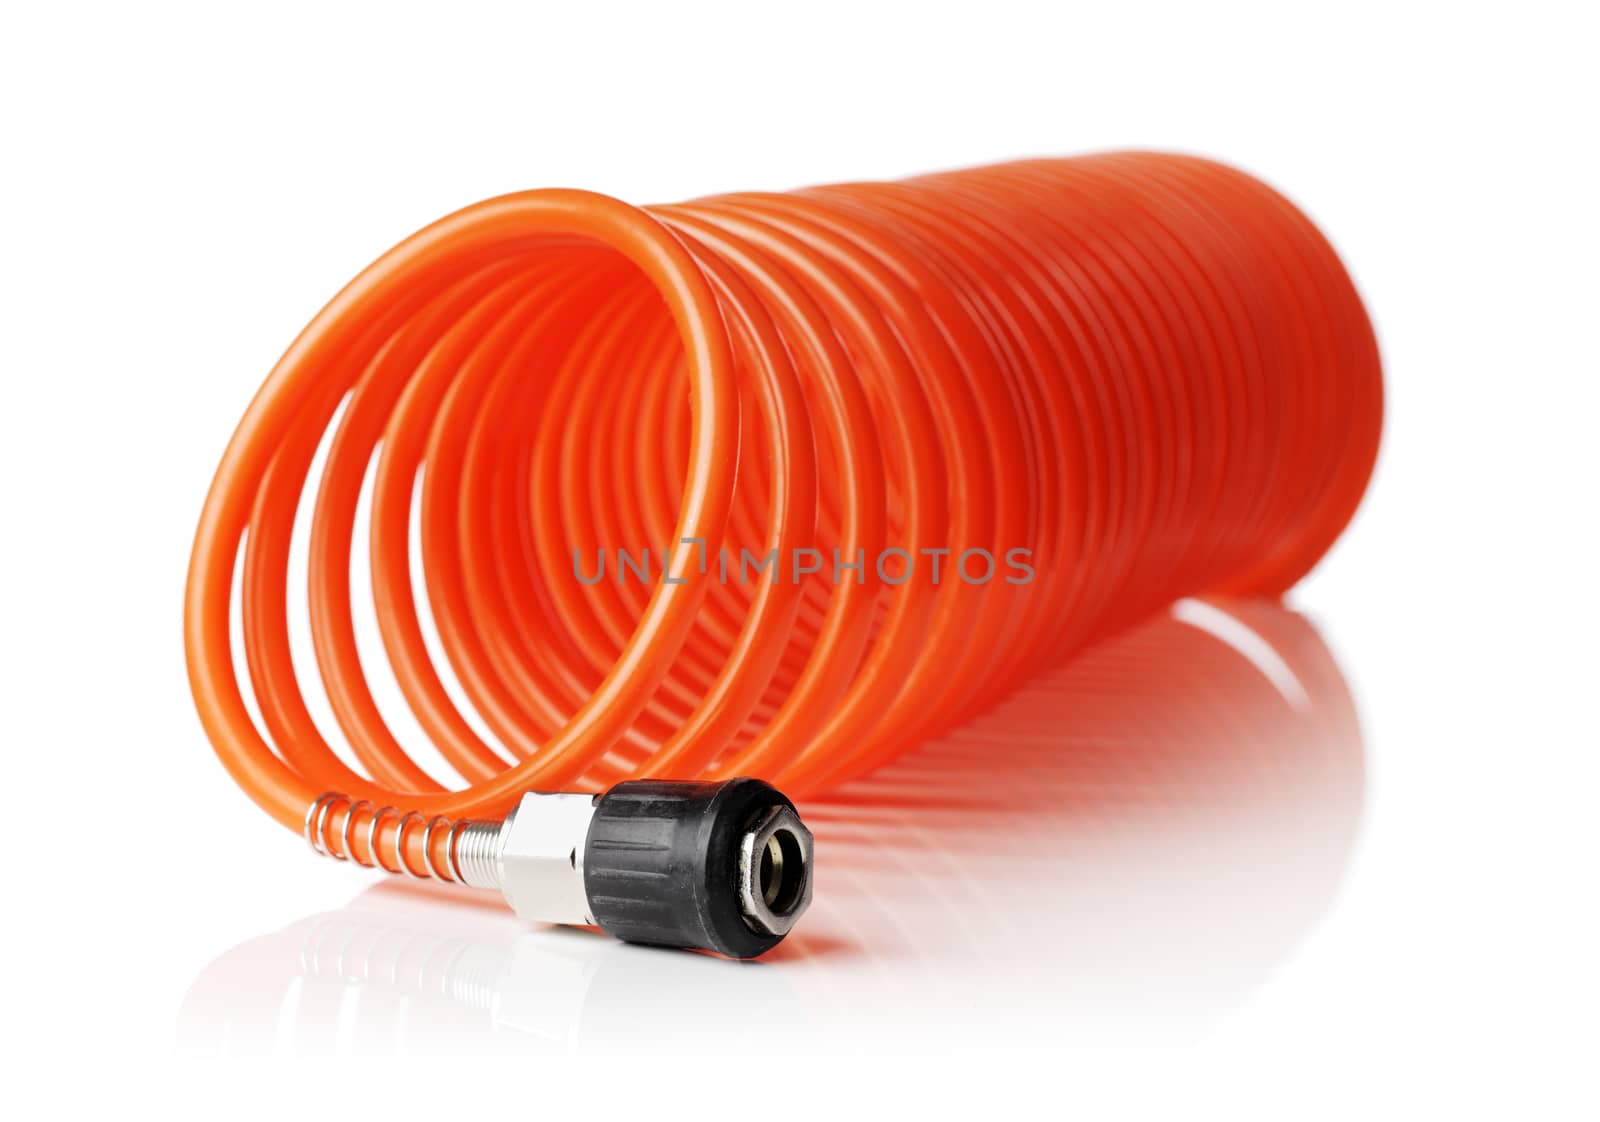 Air Hose by Stocksnapper